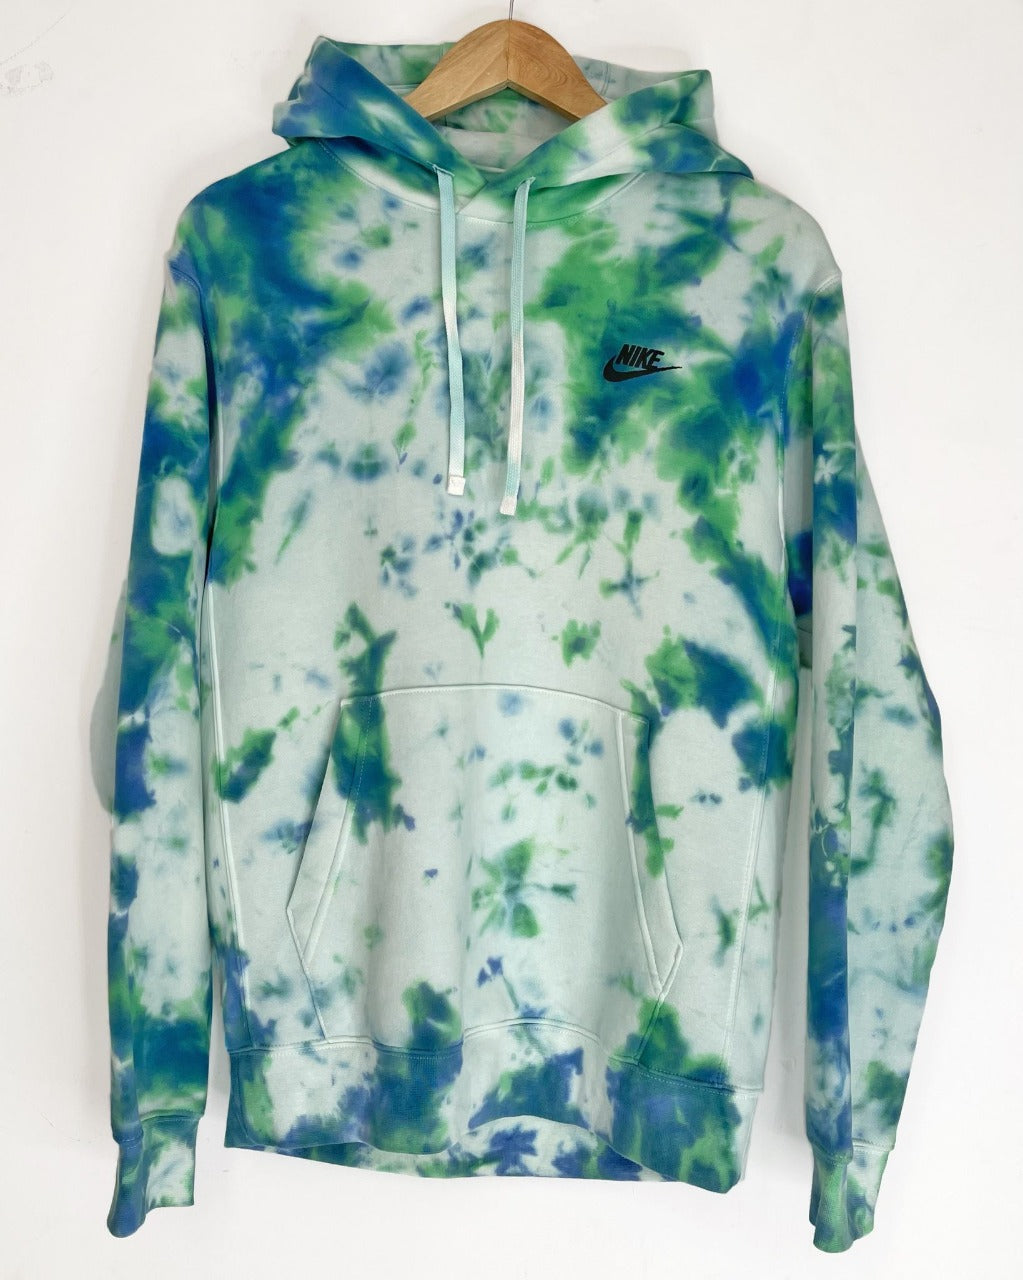 Unique Tulip Tie Dye pattern on a comfy and authentic Nike hoodie.